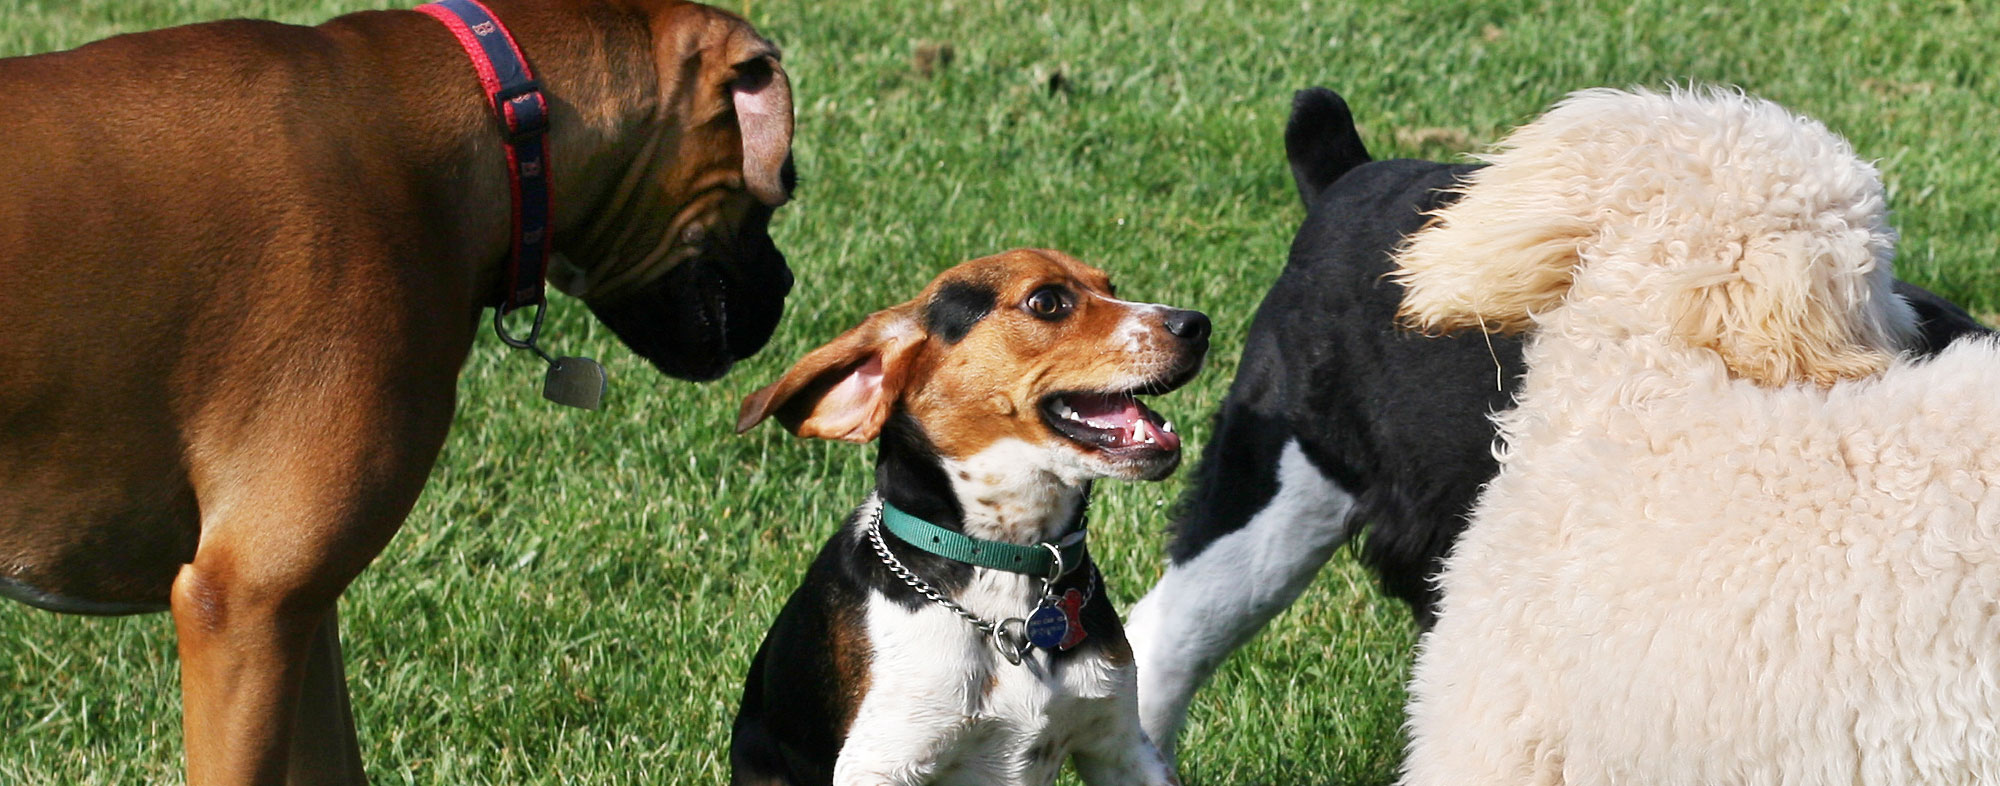 Immunize your dog's before visiting the dog park